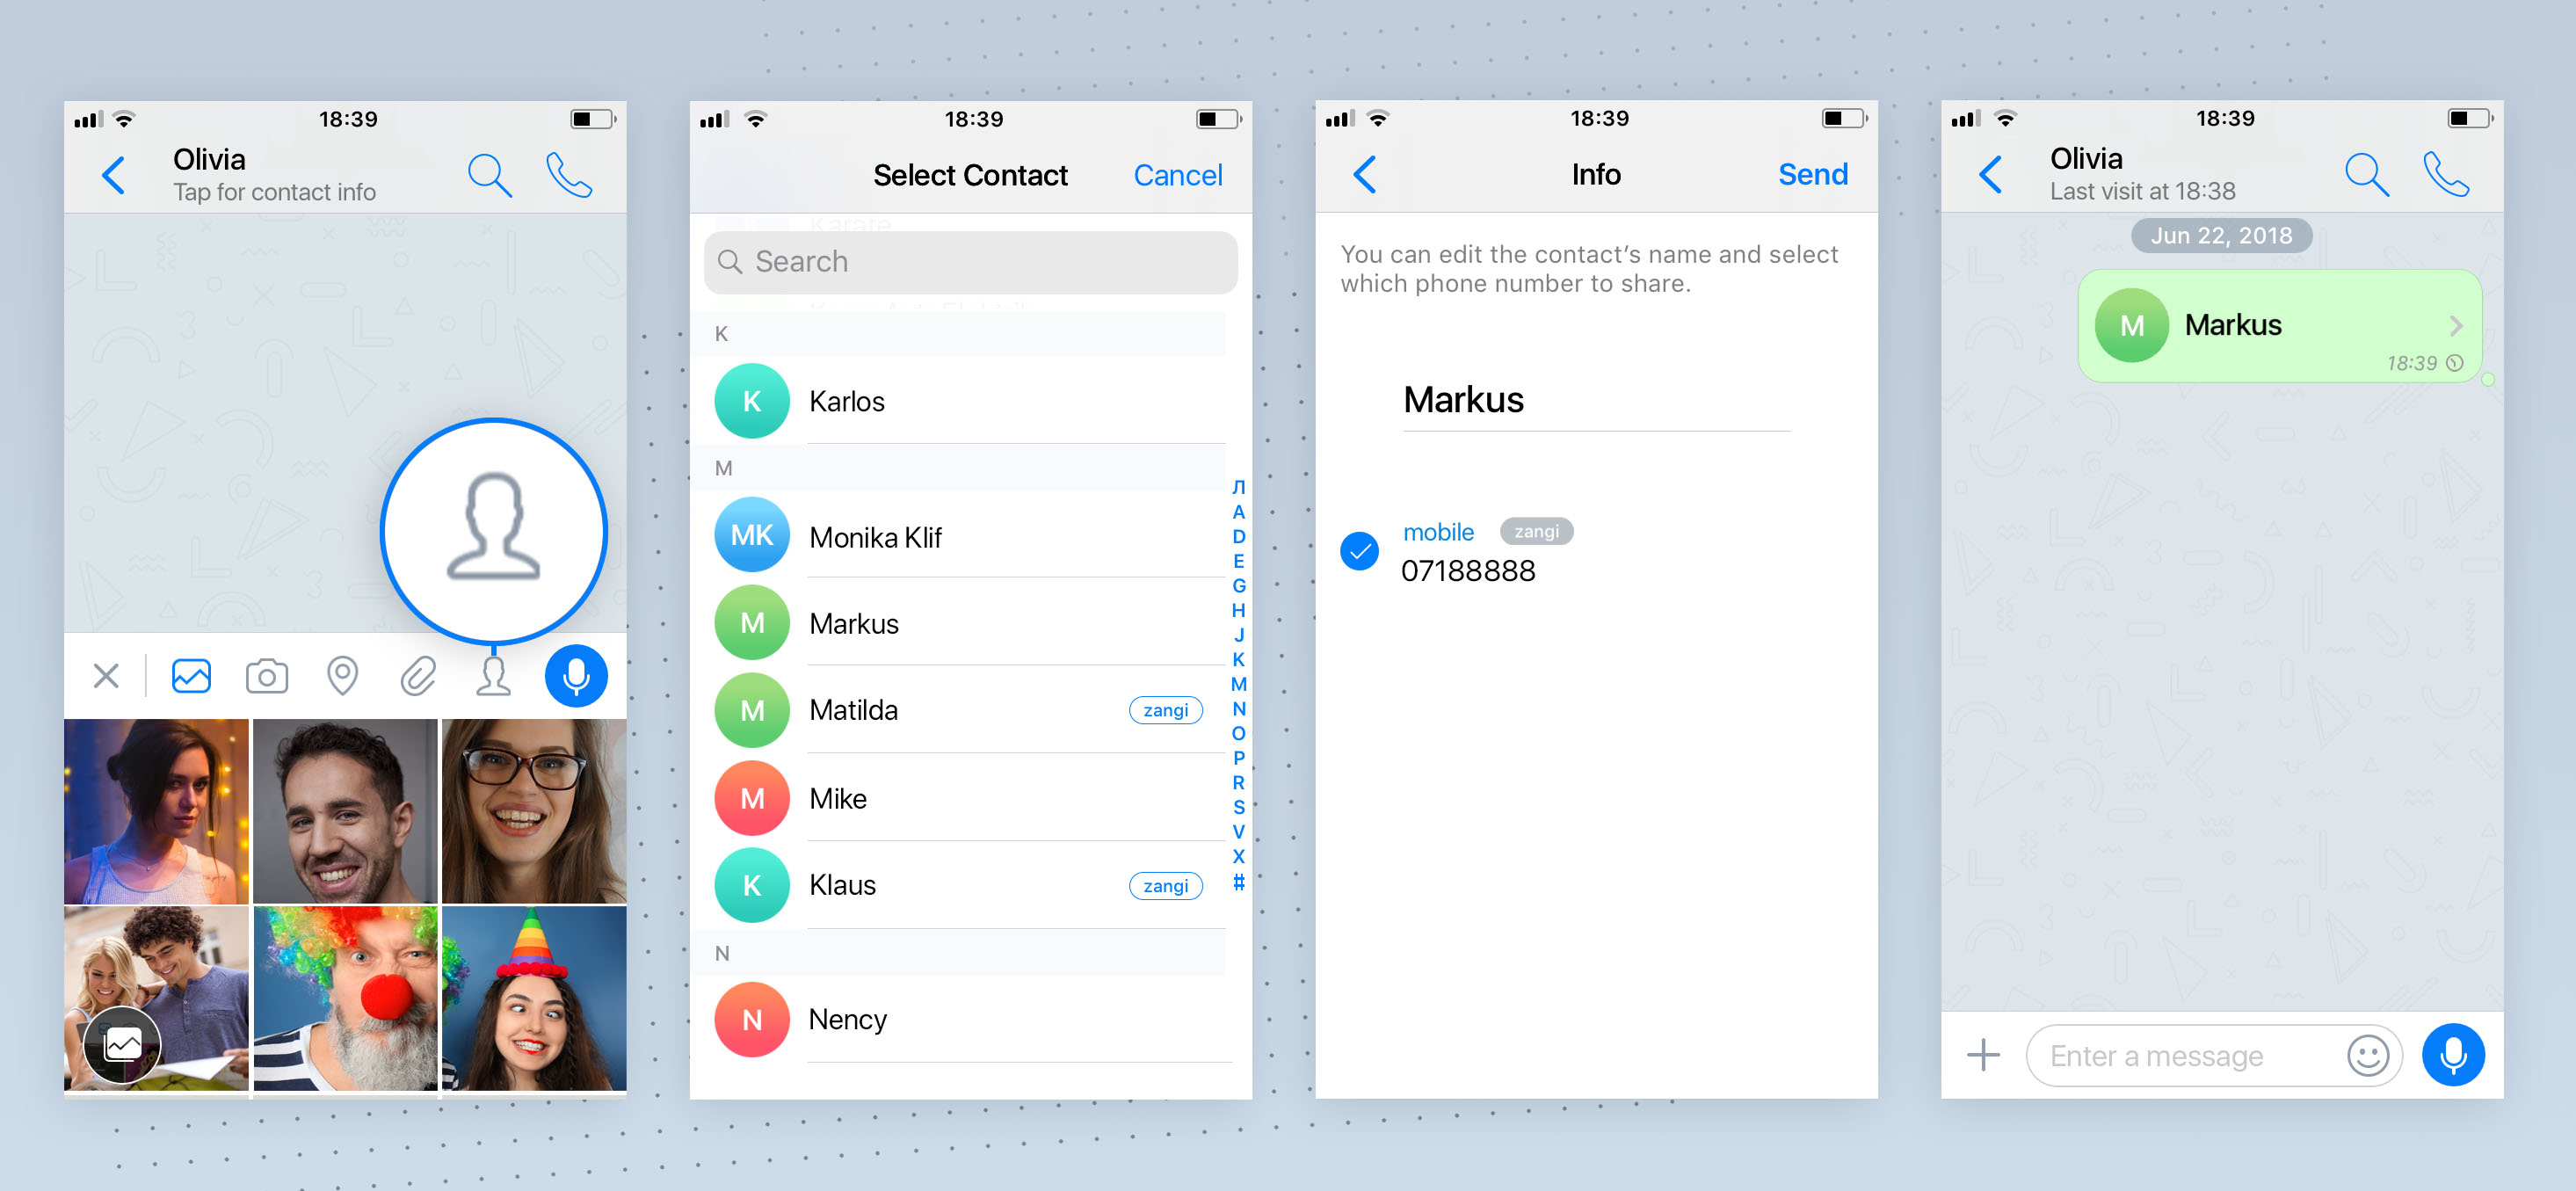 messenger supports ios 12, messenger send contacts